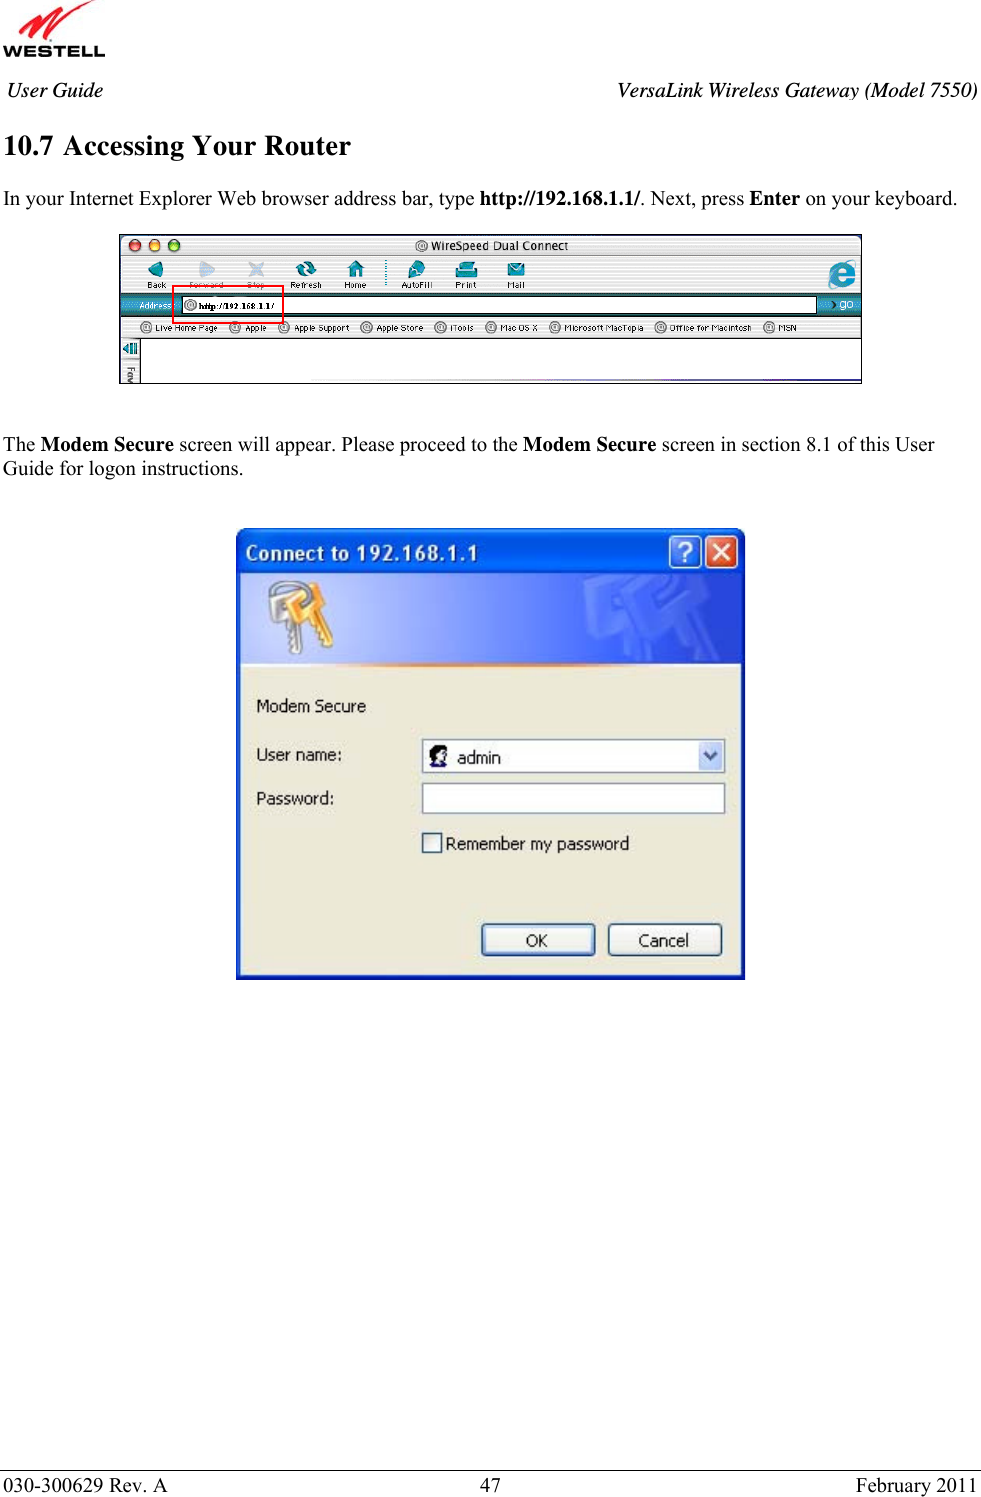       030-300629 Rev. A  47       February 2011 User Guide  VersaLink Wireless Gateway (Model 7550) 10.7 Accessing Your Router  In your Internet Explorer Web browser address bar, type http://192.168.1.1/. Next, press Enter on your keyboard.      The Modem Secure screen will appear. Please proceed to the Modem Secure screen in section 8.1 of this User Guide for logon instructions.        